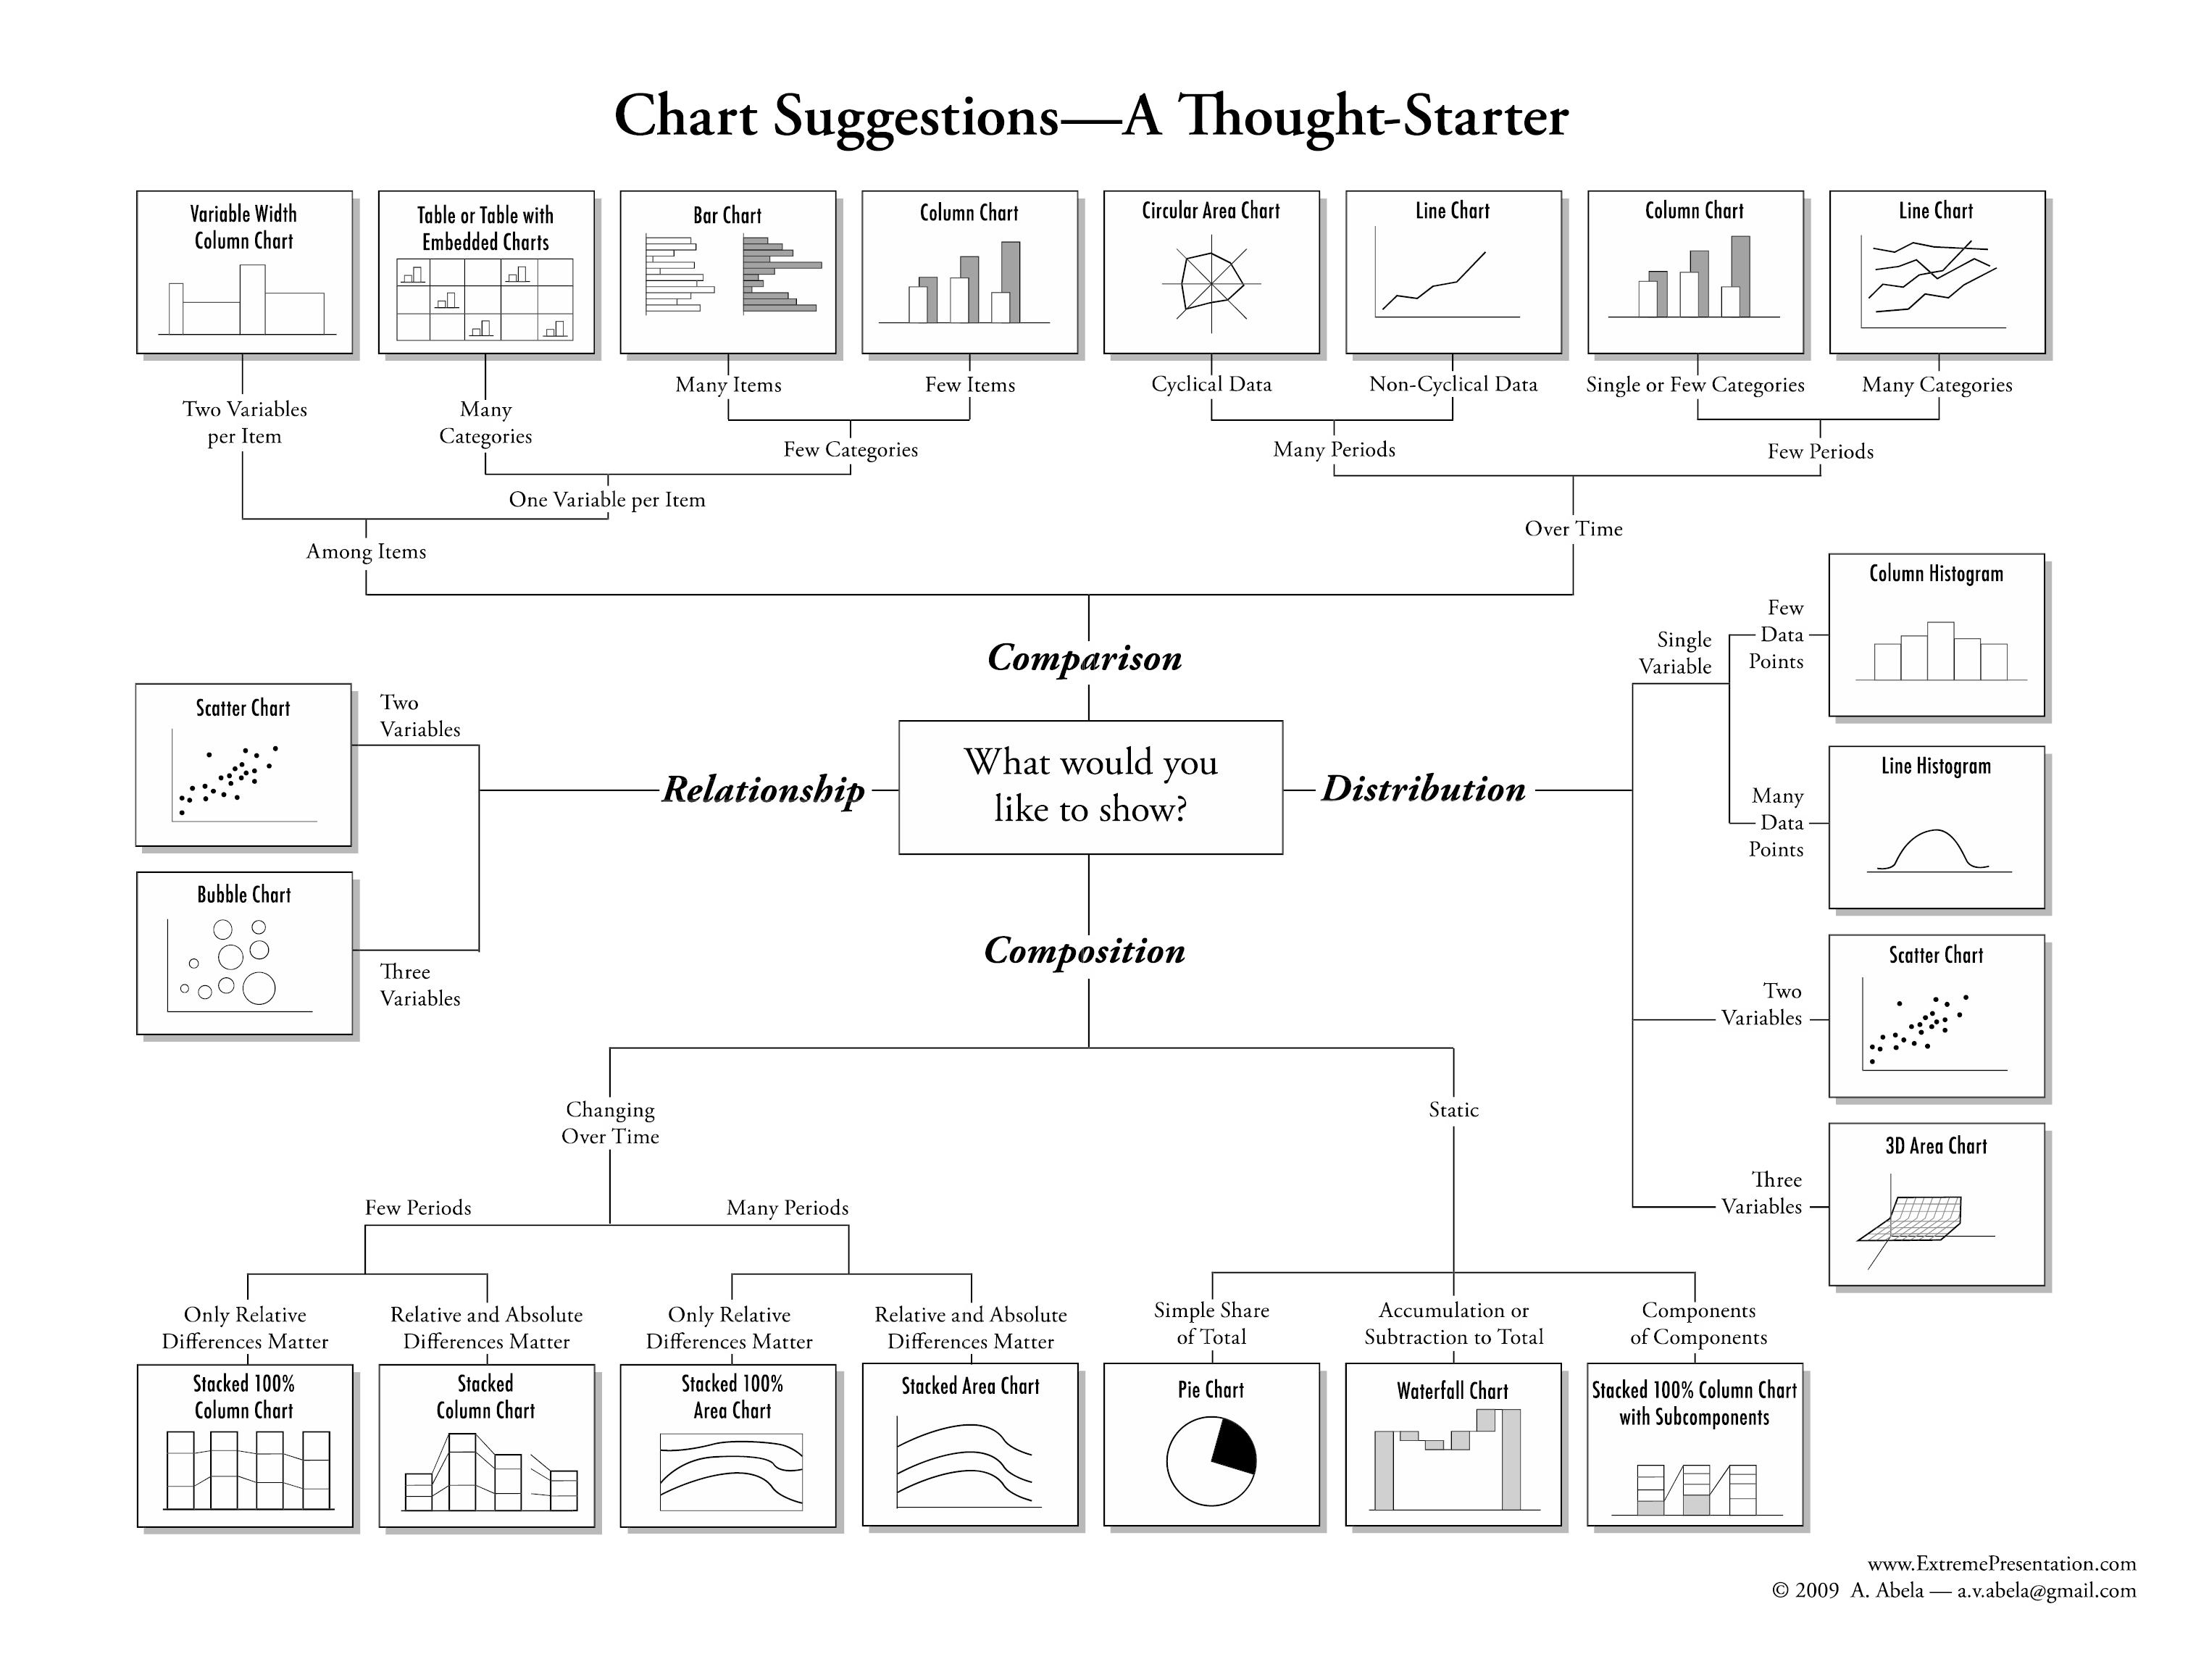 Chart suggestions (Source: <https://extremepresentation.com/>)